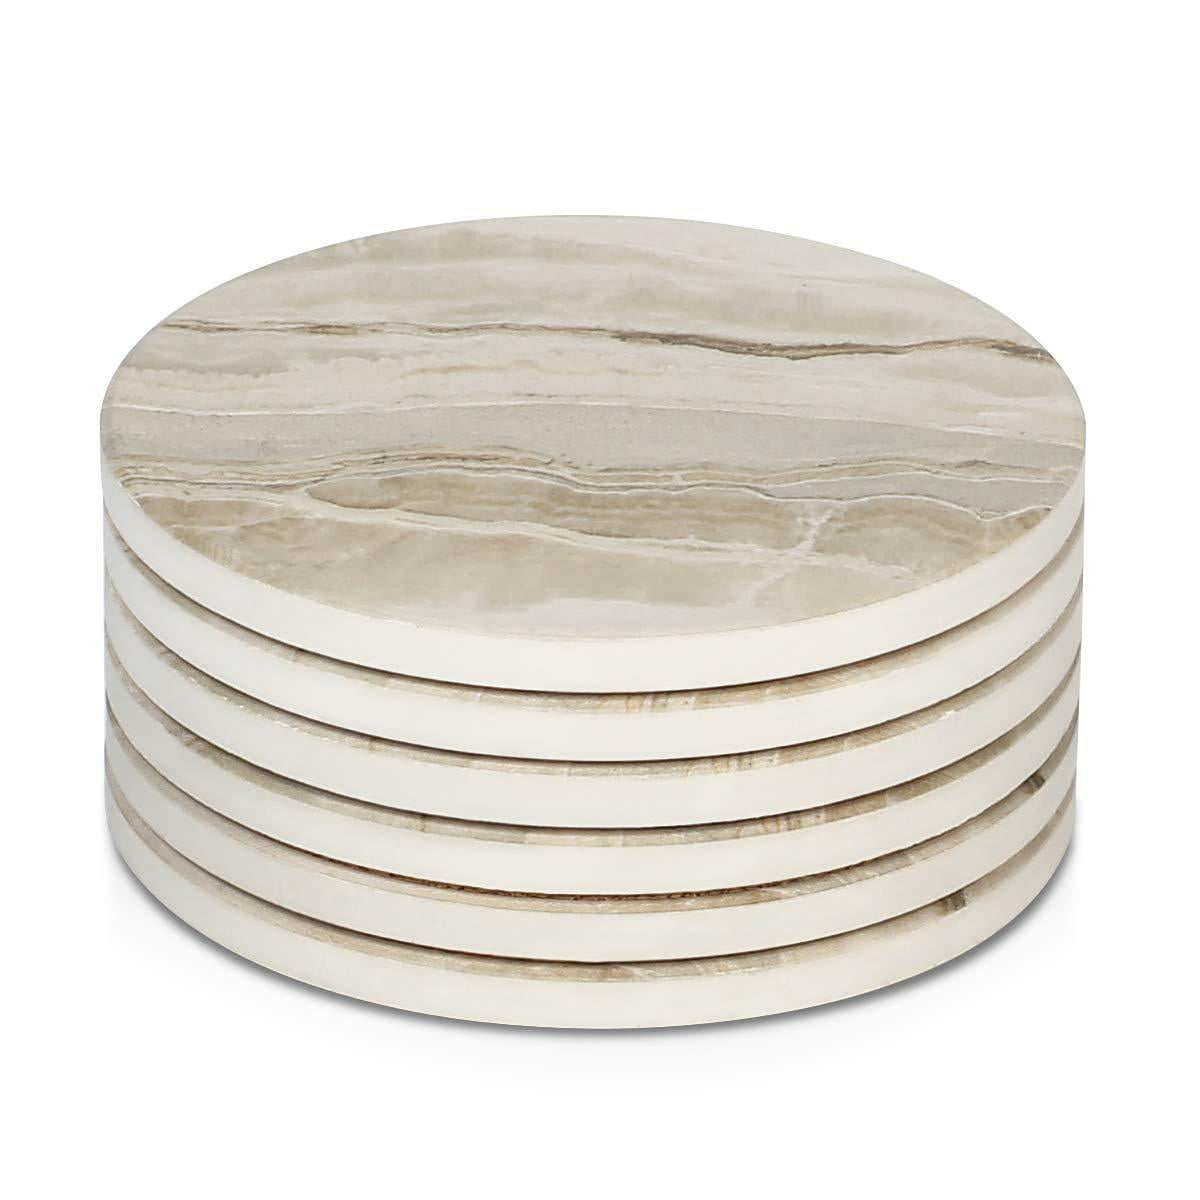 Absorbing Ceramic Coasters with Cork Base Set of 4 Chinese Style Coasters for Drinks Ceramic Coasters set Suitable for Kinds of Mugs and Cups Prevent Furniture from Dirty and Scratched 